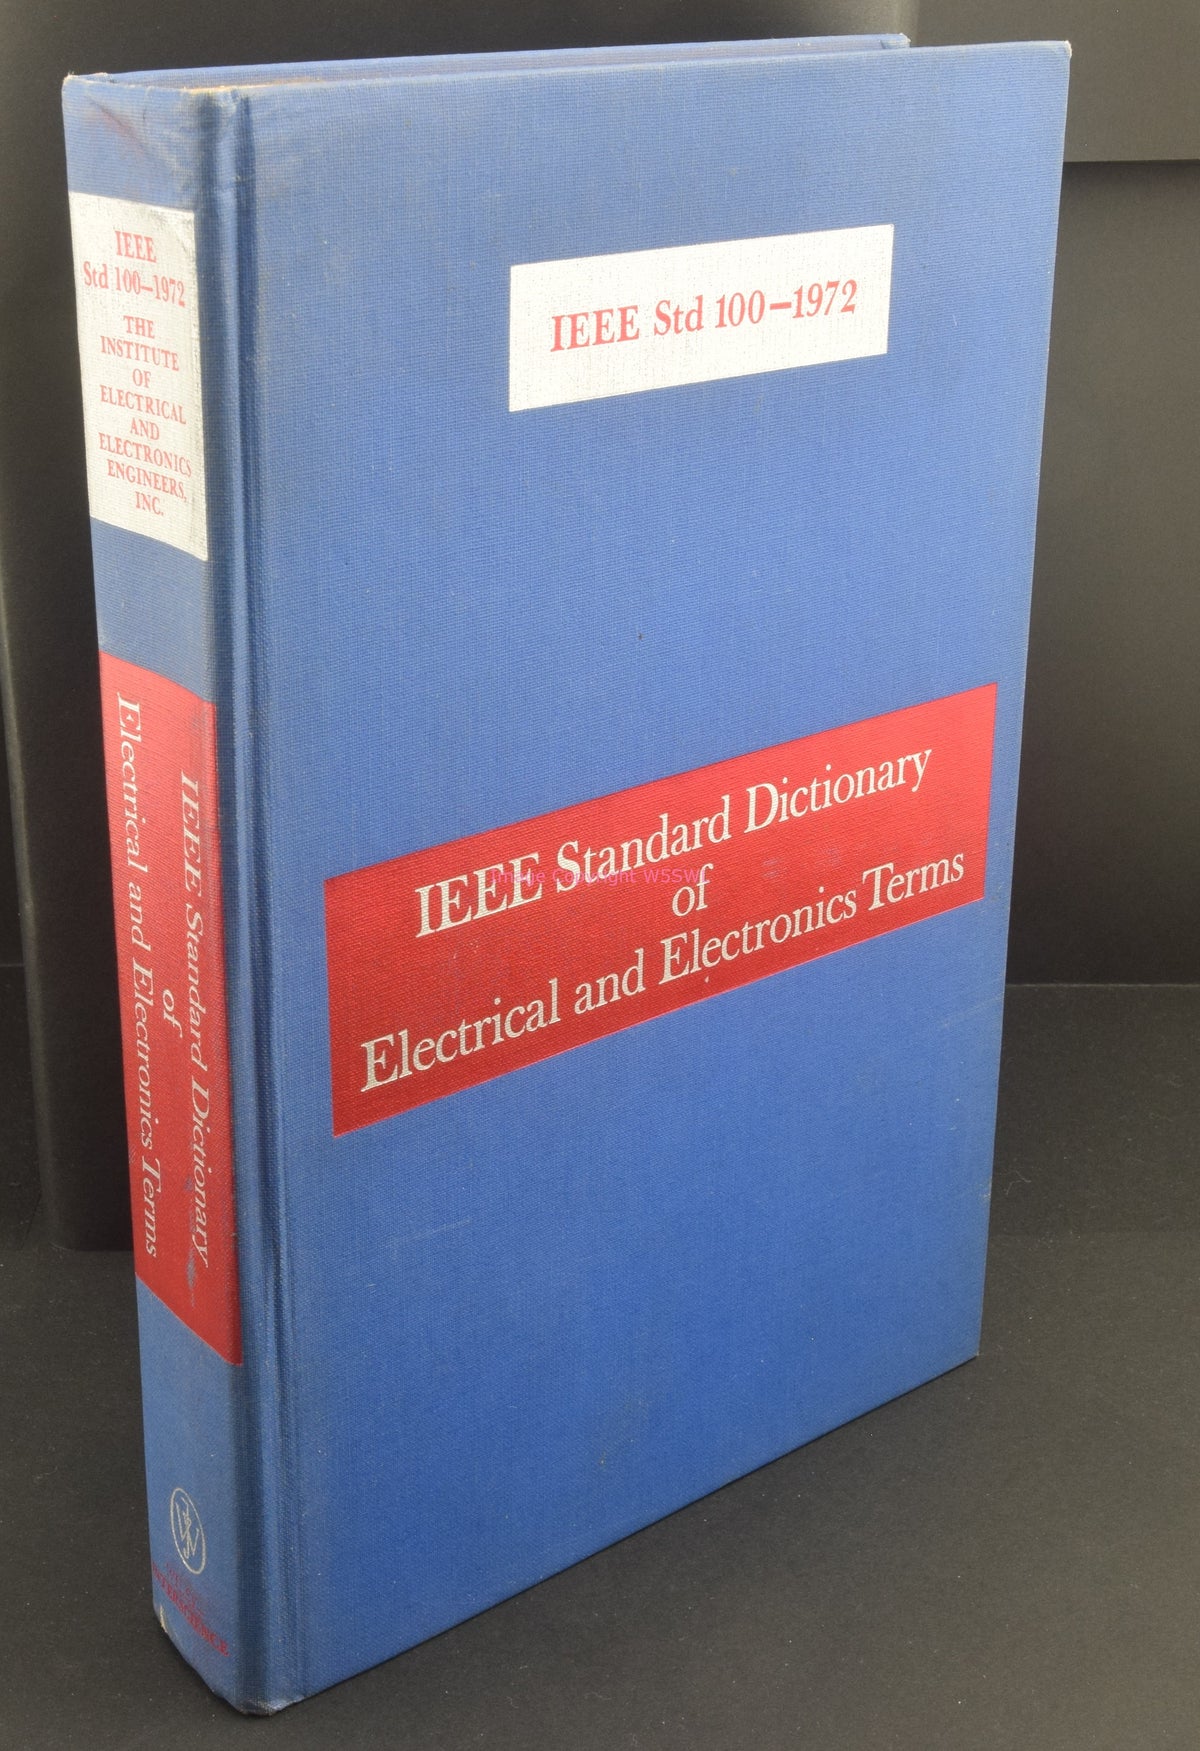 IEEE Std 100-1972 Standard Dictionary of Electrical and Electronics Terms - Dave's Hobby Shop by W5SWL